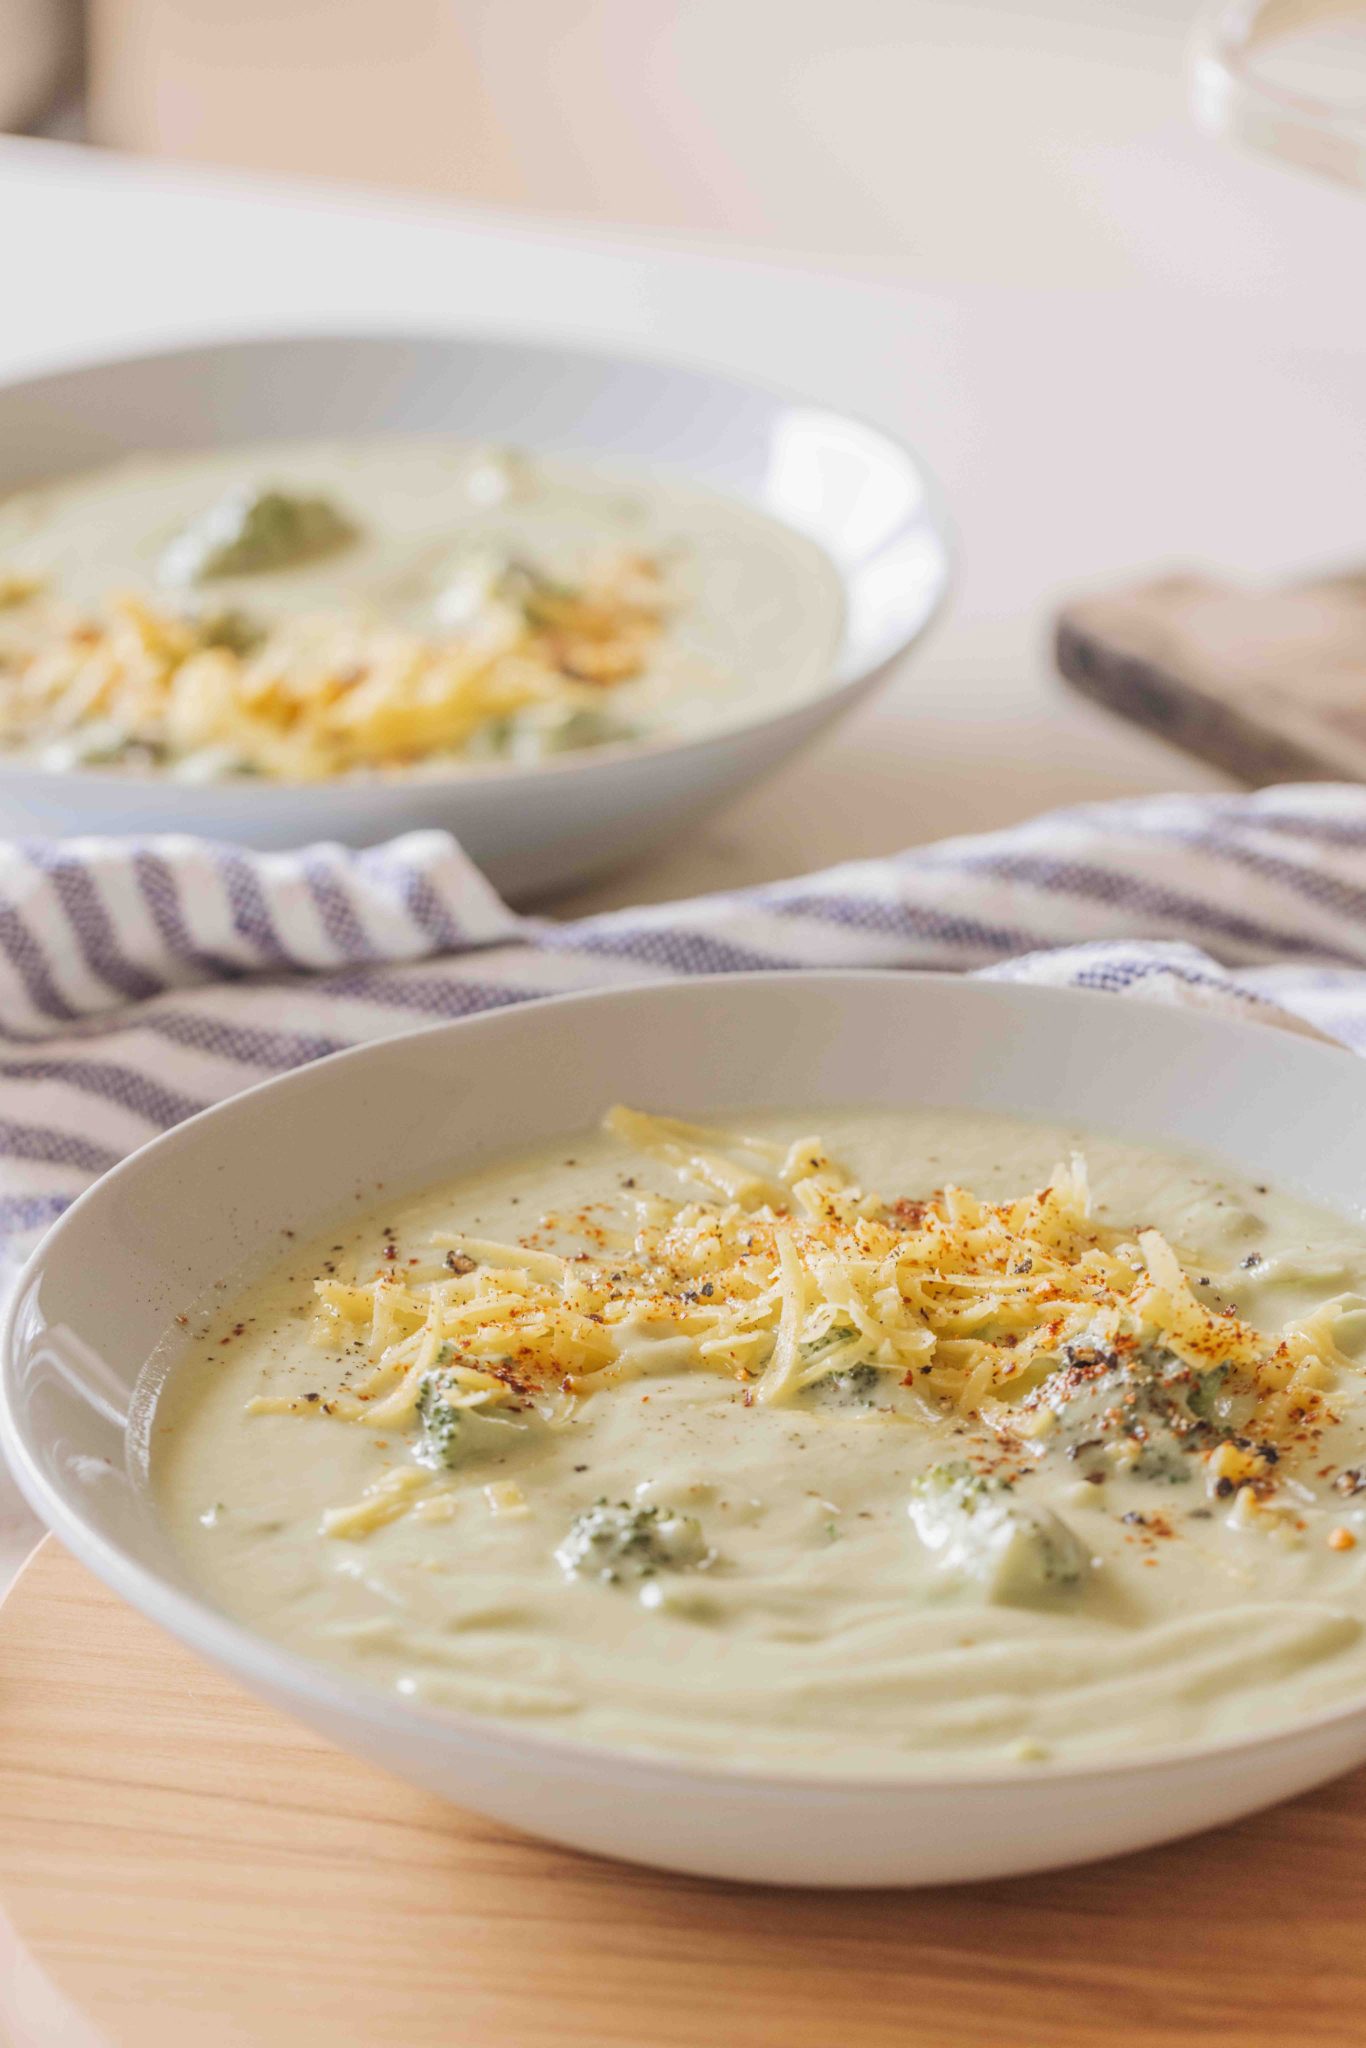 Two bowls of creamy broccoli soup, topped with grated cheese and red chilli flakes.